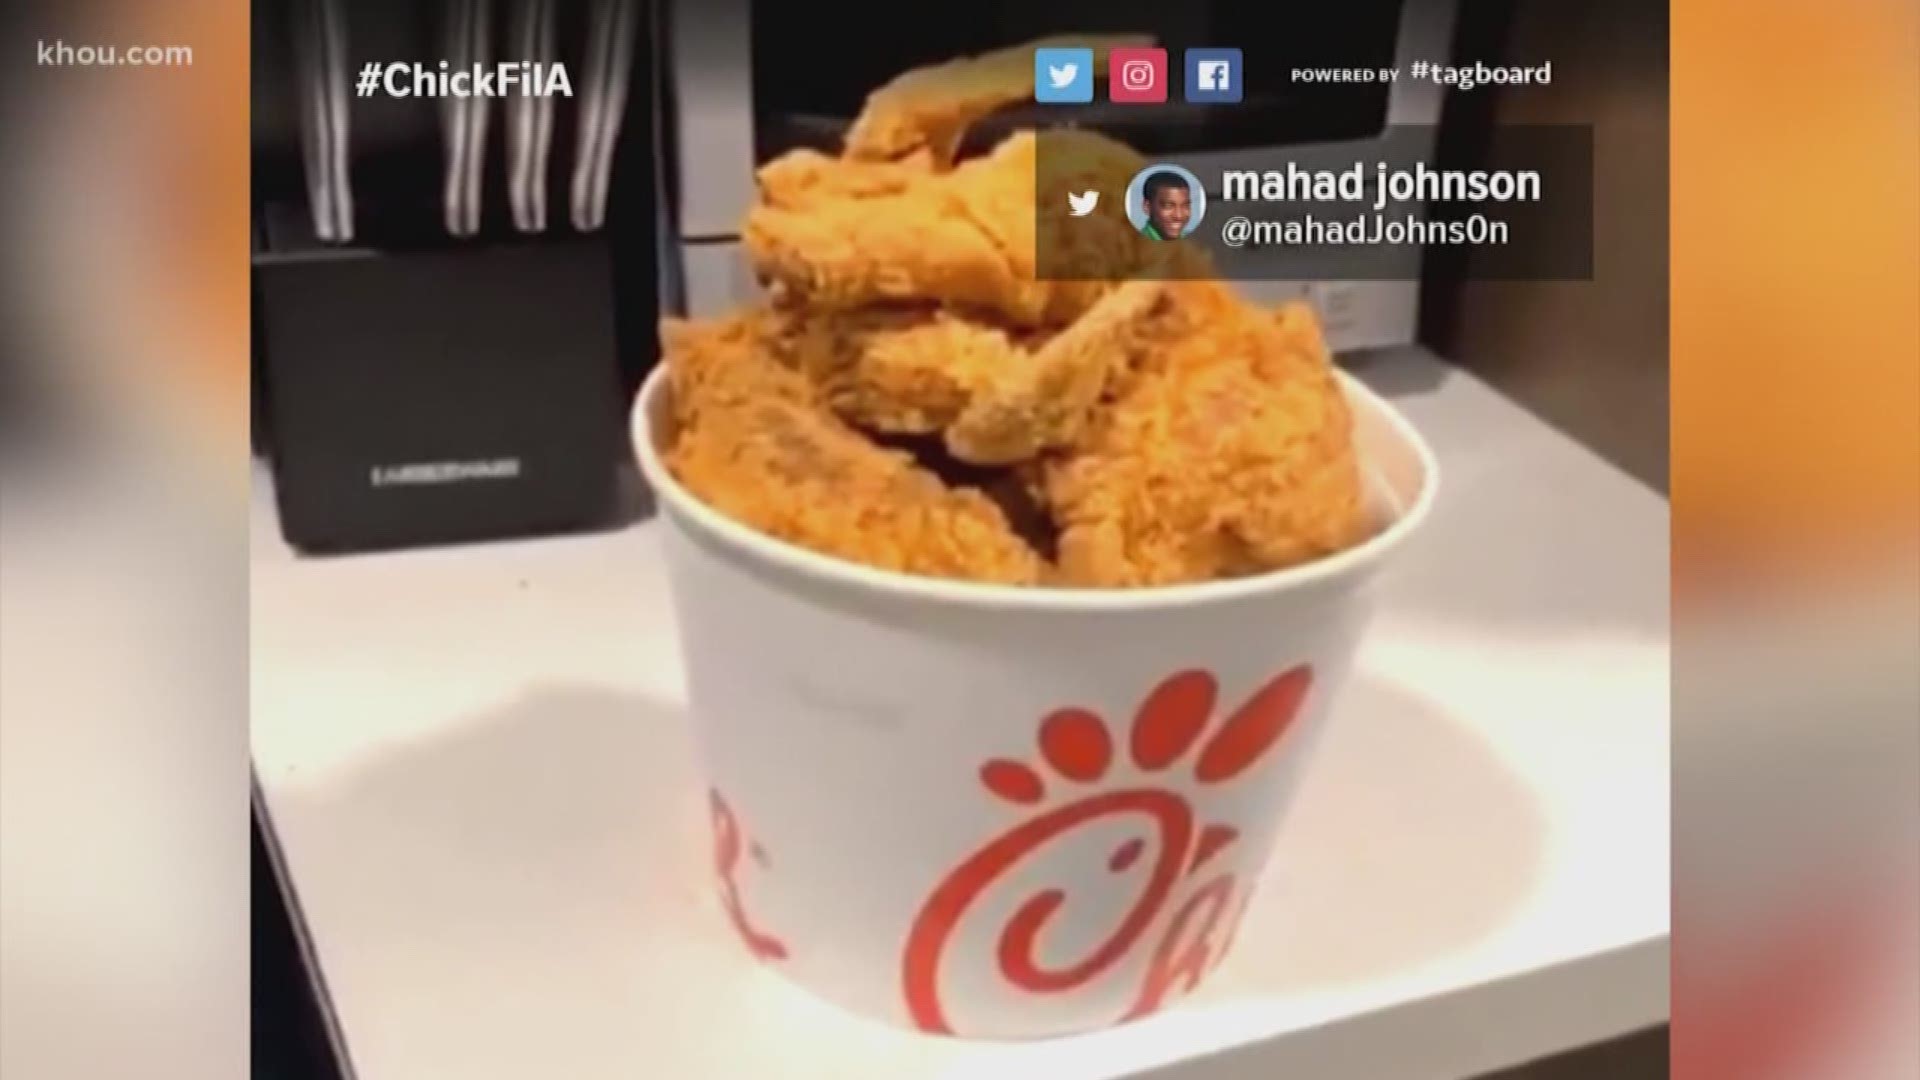 Photos and videos online have depicted a bucket of fried chicken with the Chick-fil-A brand but is it real?